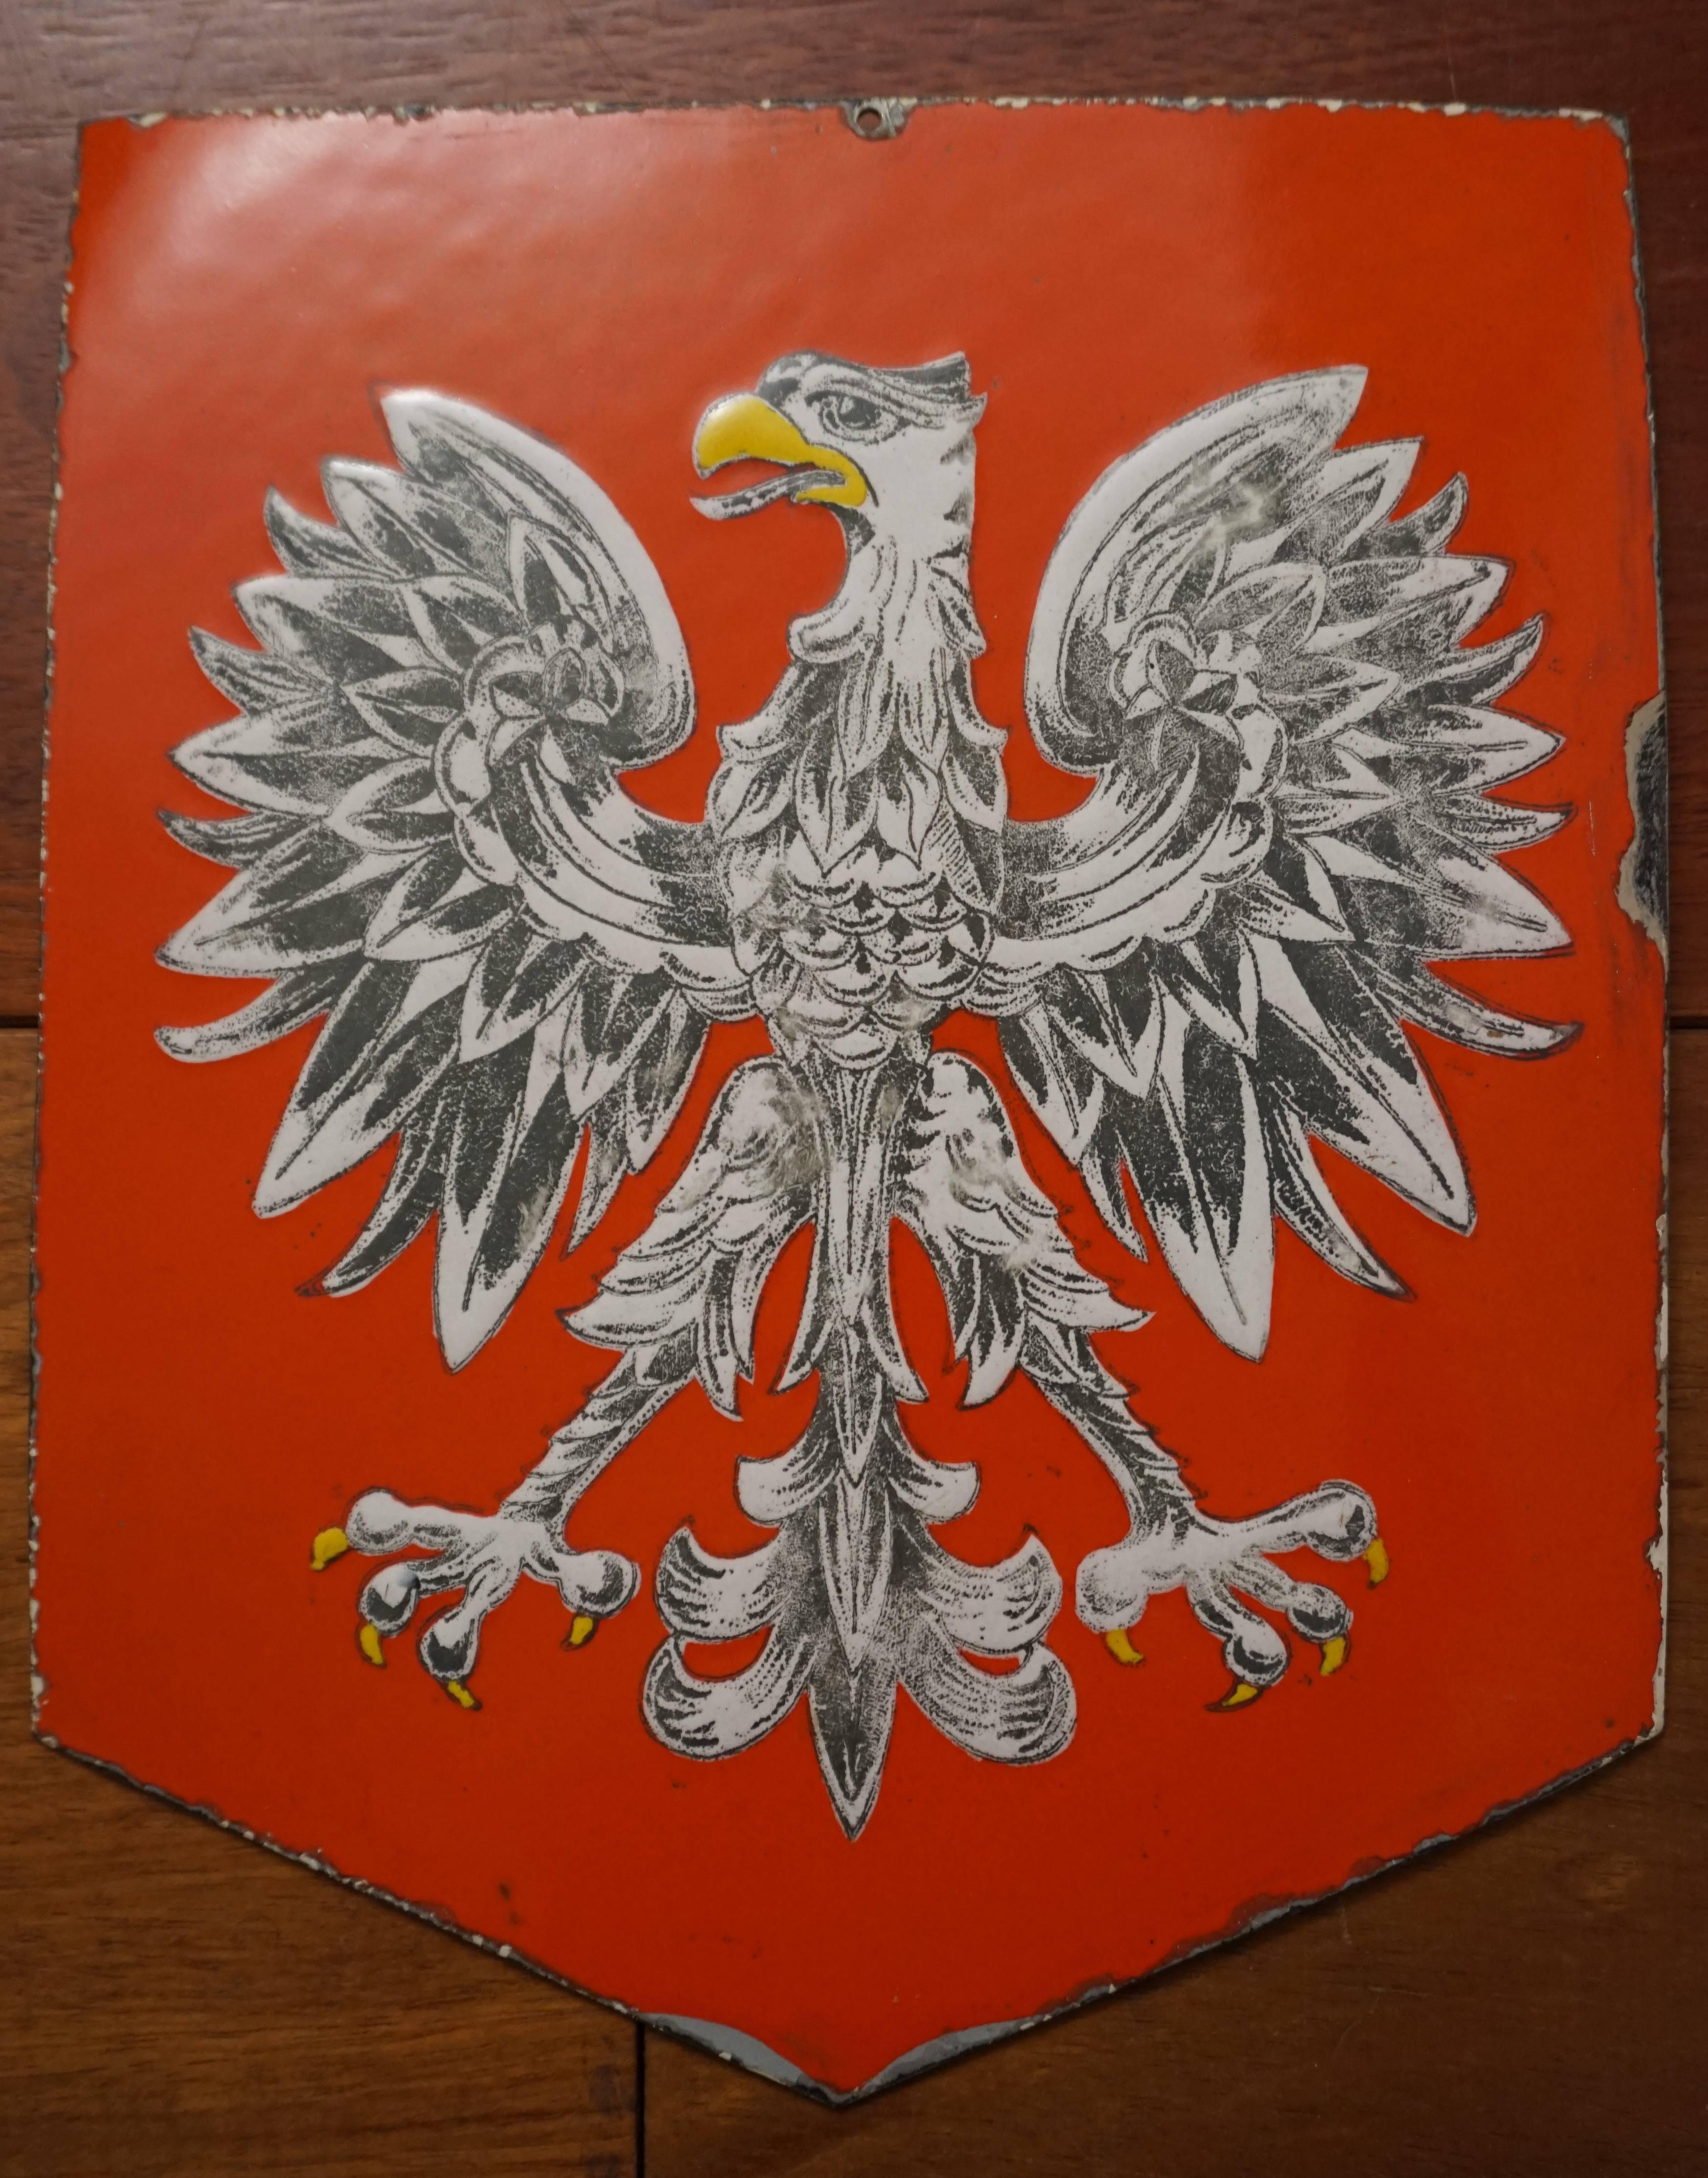 Mid to Early 20th Century Enameled Coat of Arms / Crest of White Eagle of Poland 2